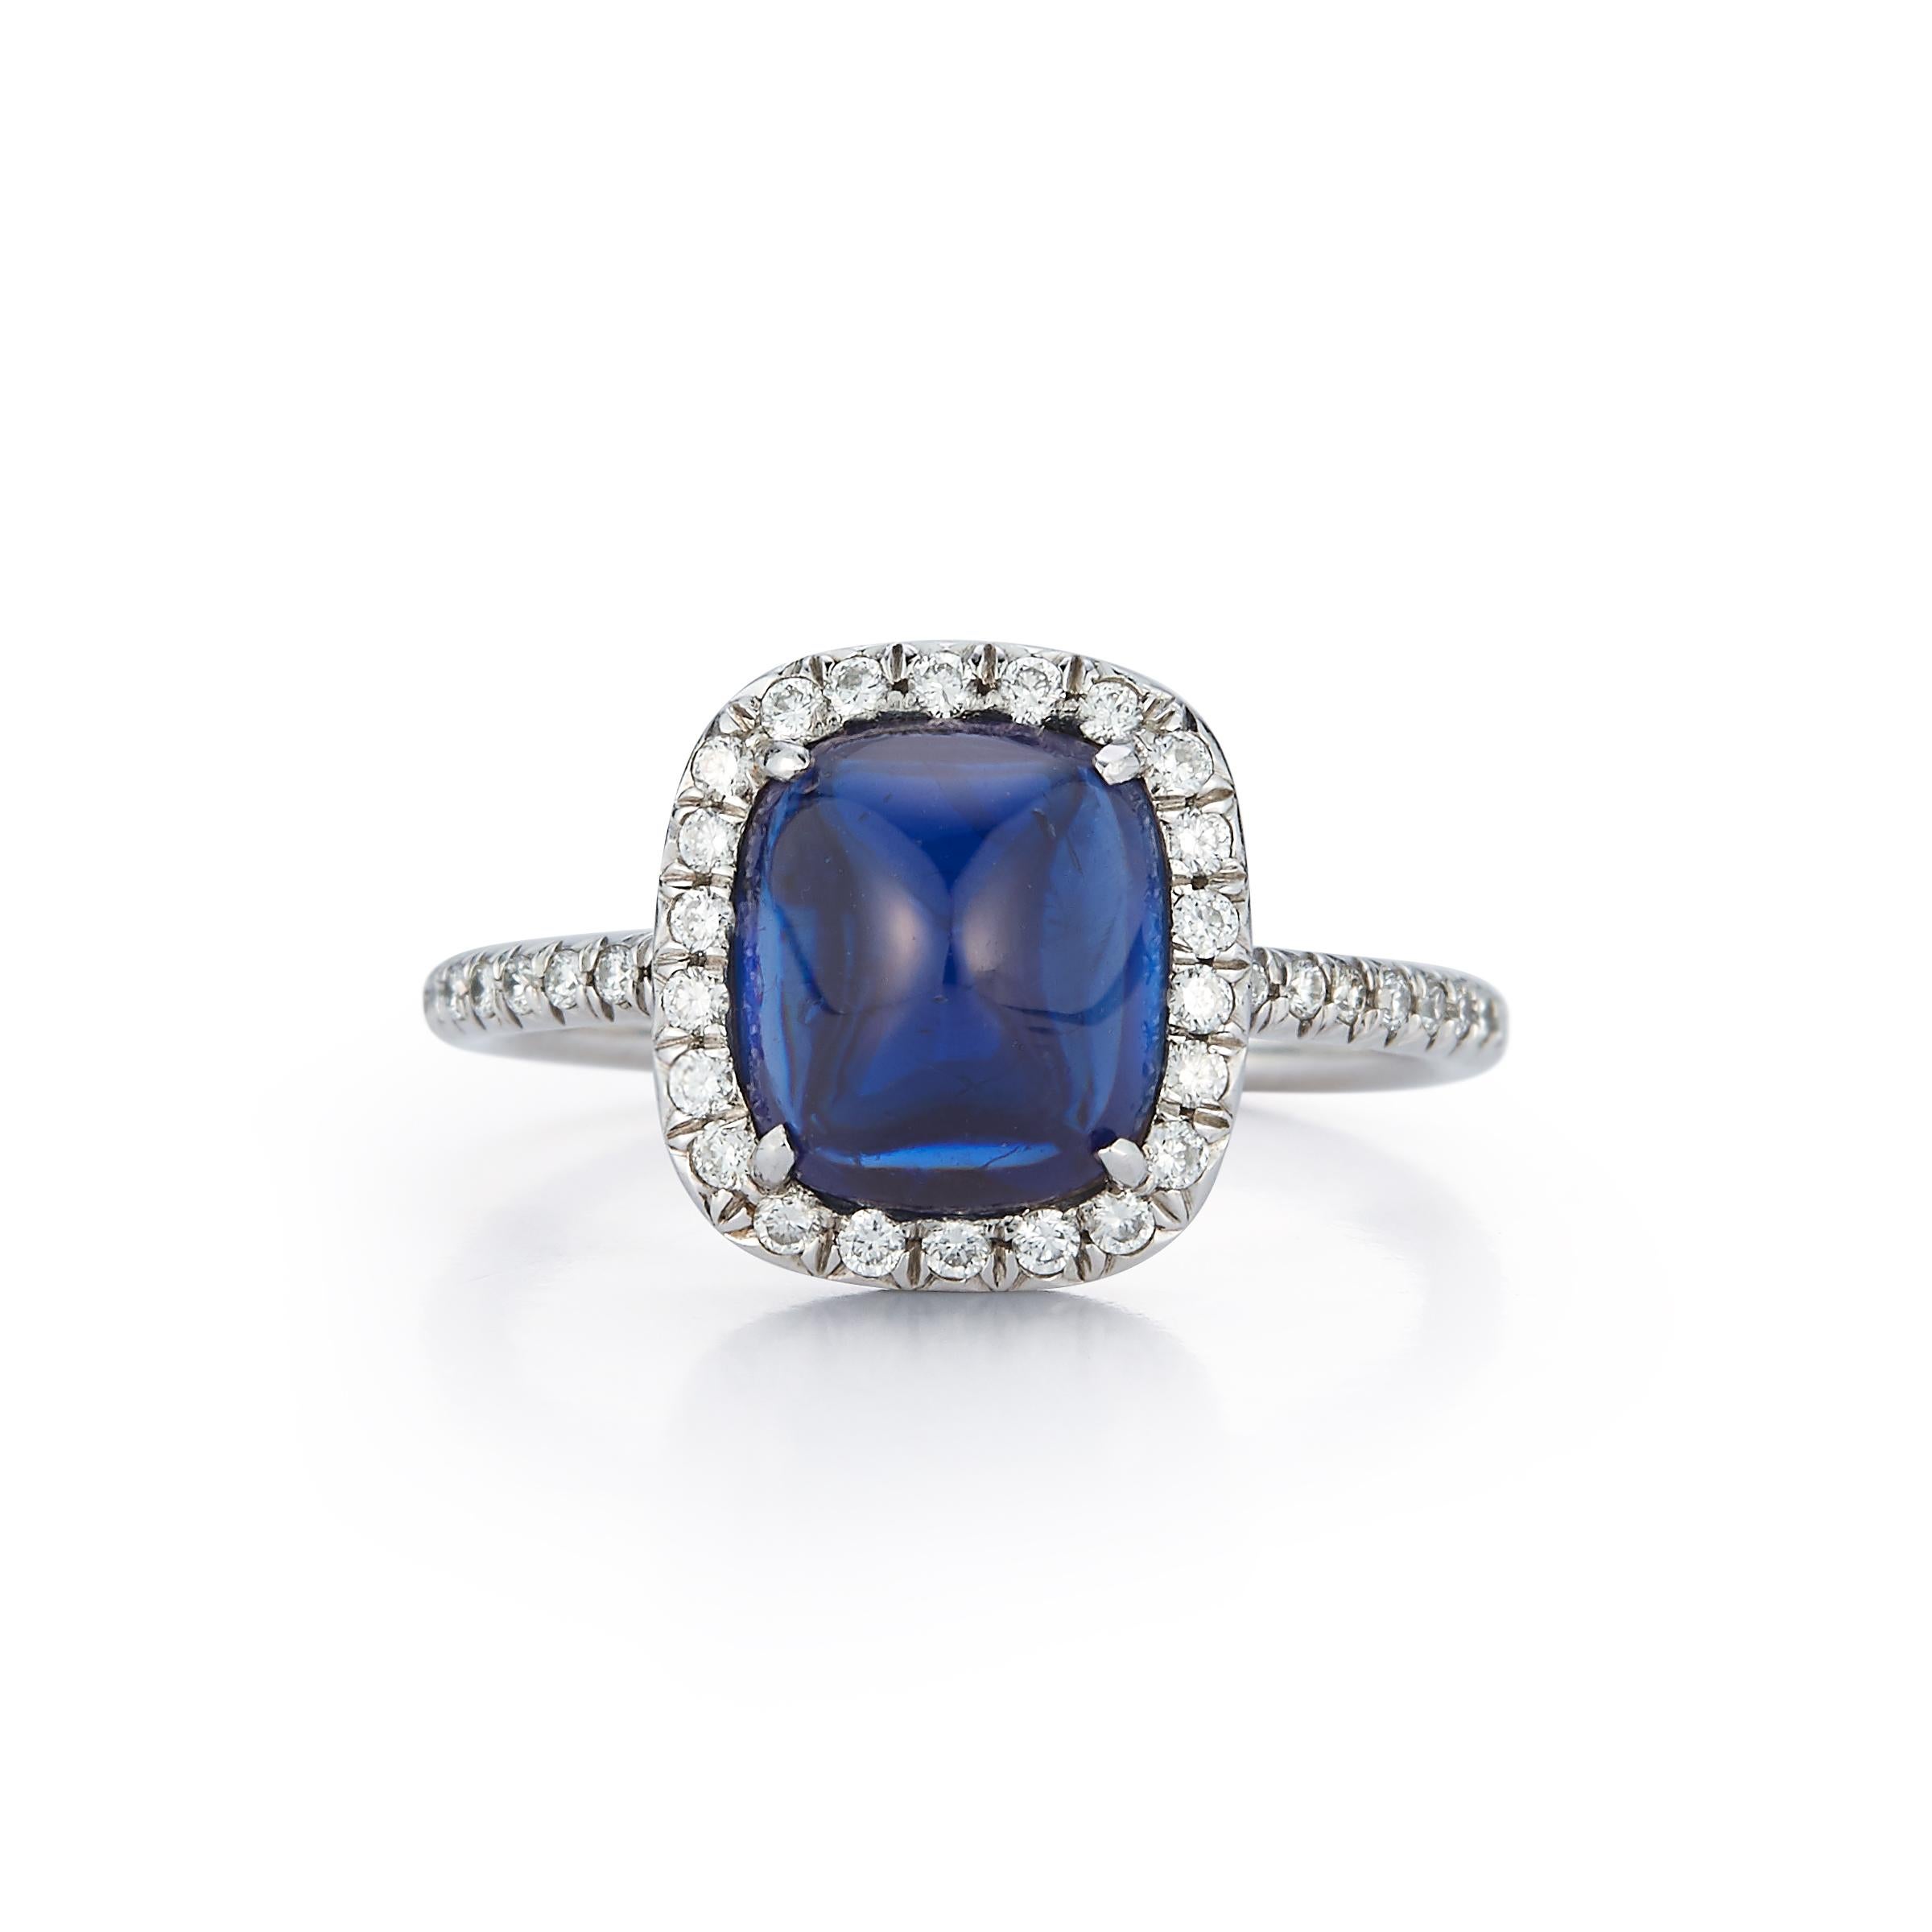 Estate Jewelry Curated by Parulina- This beautiful ring features a 3.44ct cab cut blue sapphire surrounded by .50ct of diamonds. Set in 18K white gold. Size 6.5

Metal:18K White Gold
Gemstone Carat: 3.44ct sapphire
Diamond Carat: 0.50ct